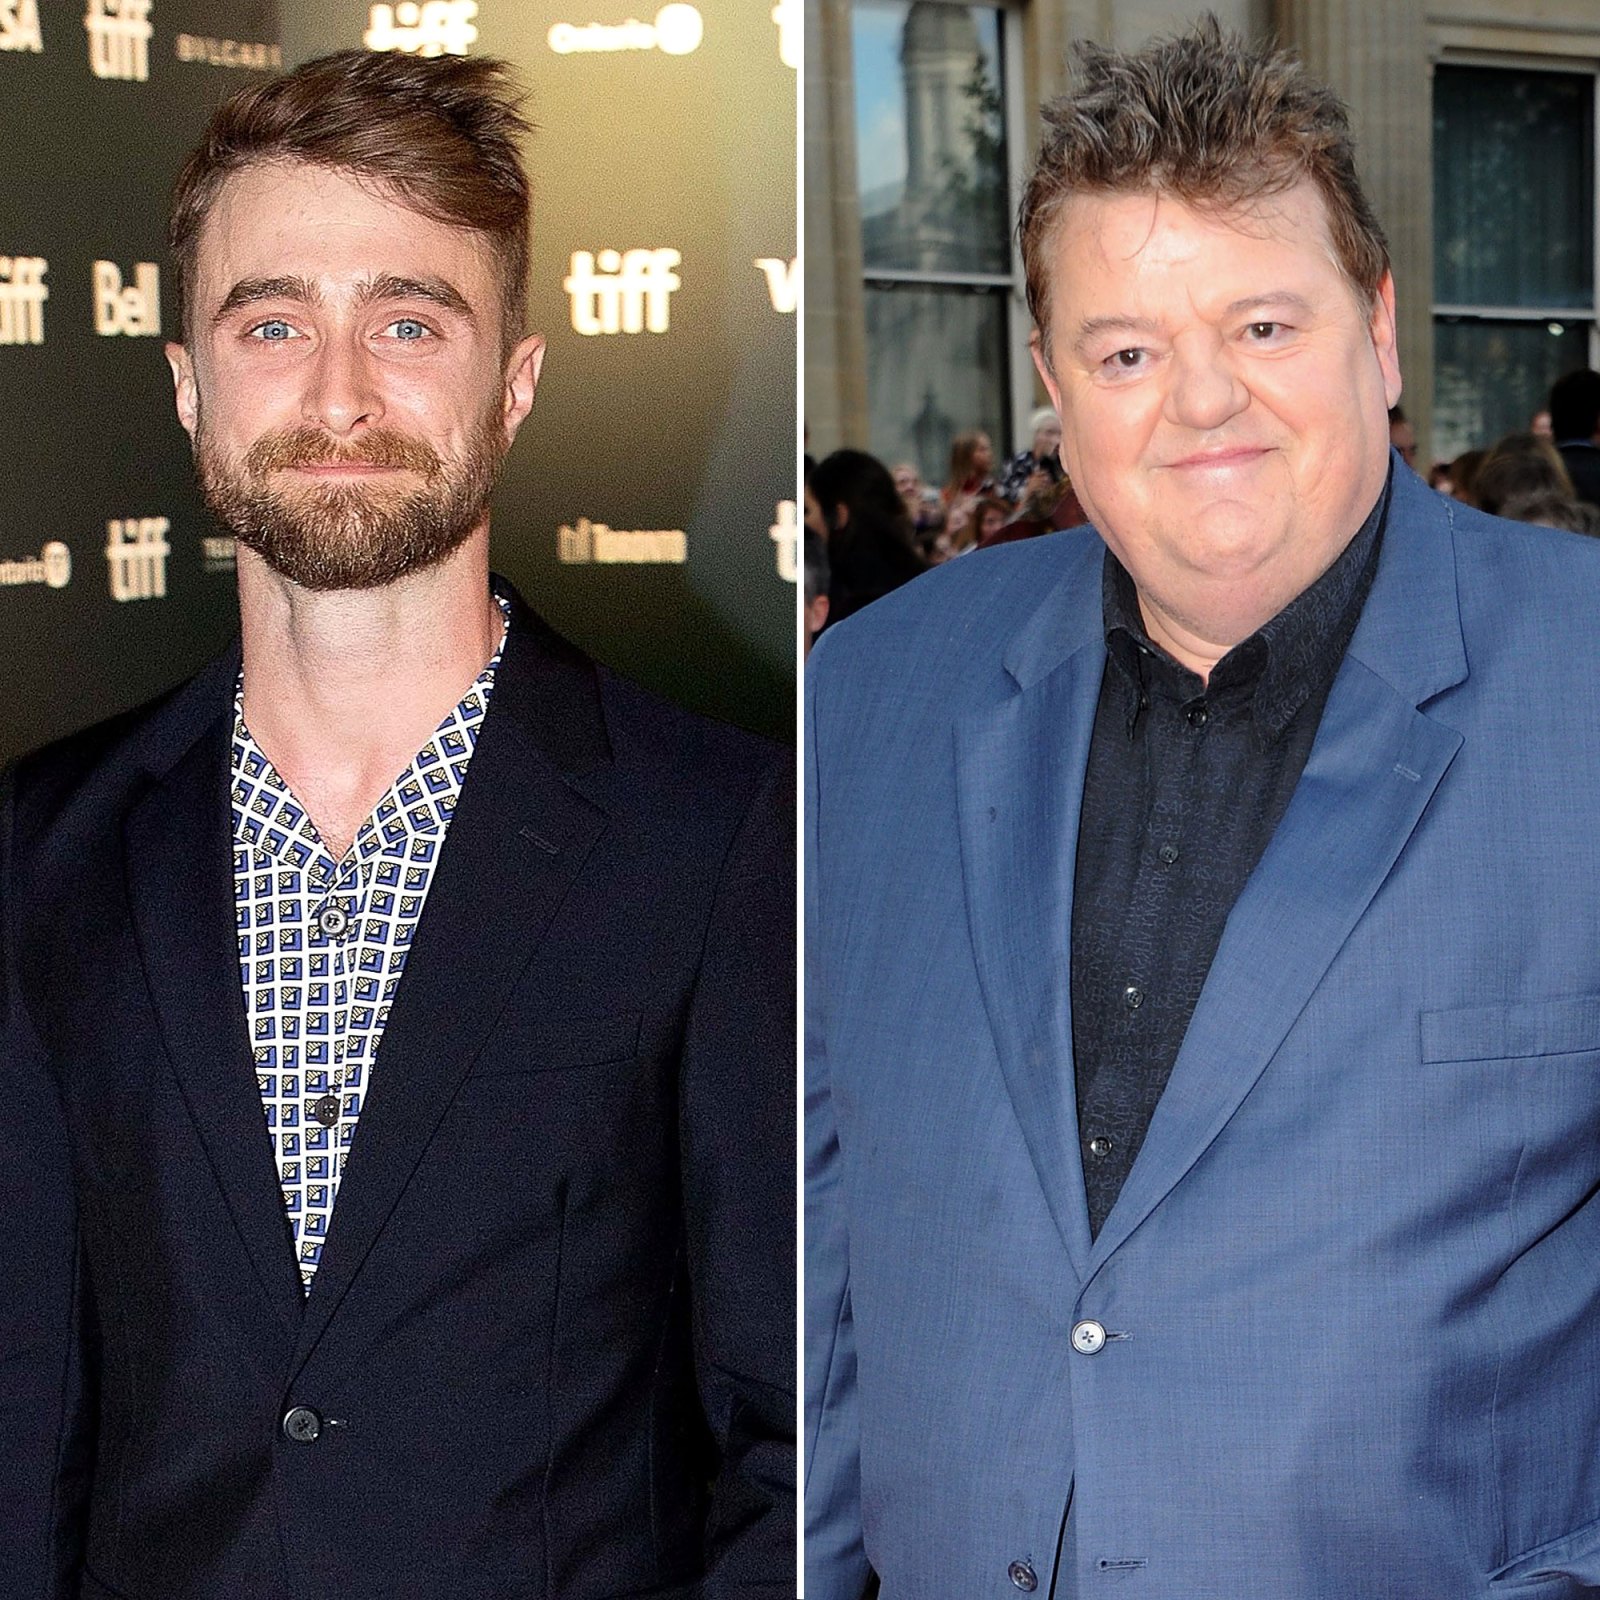 Daniel Radcliffe Pays Tribute to Harry Potter Costar Robbie Coltrane After His Death